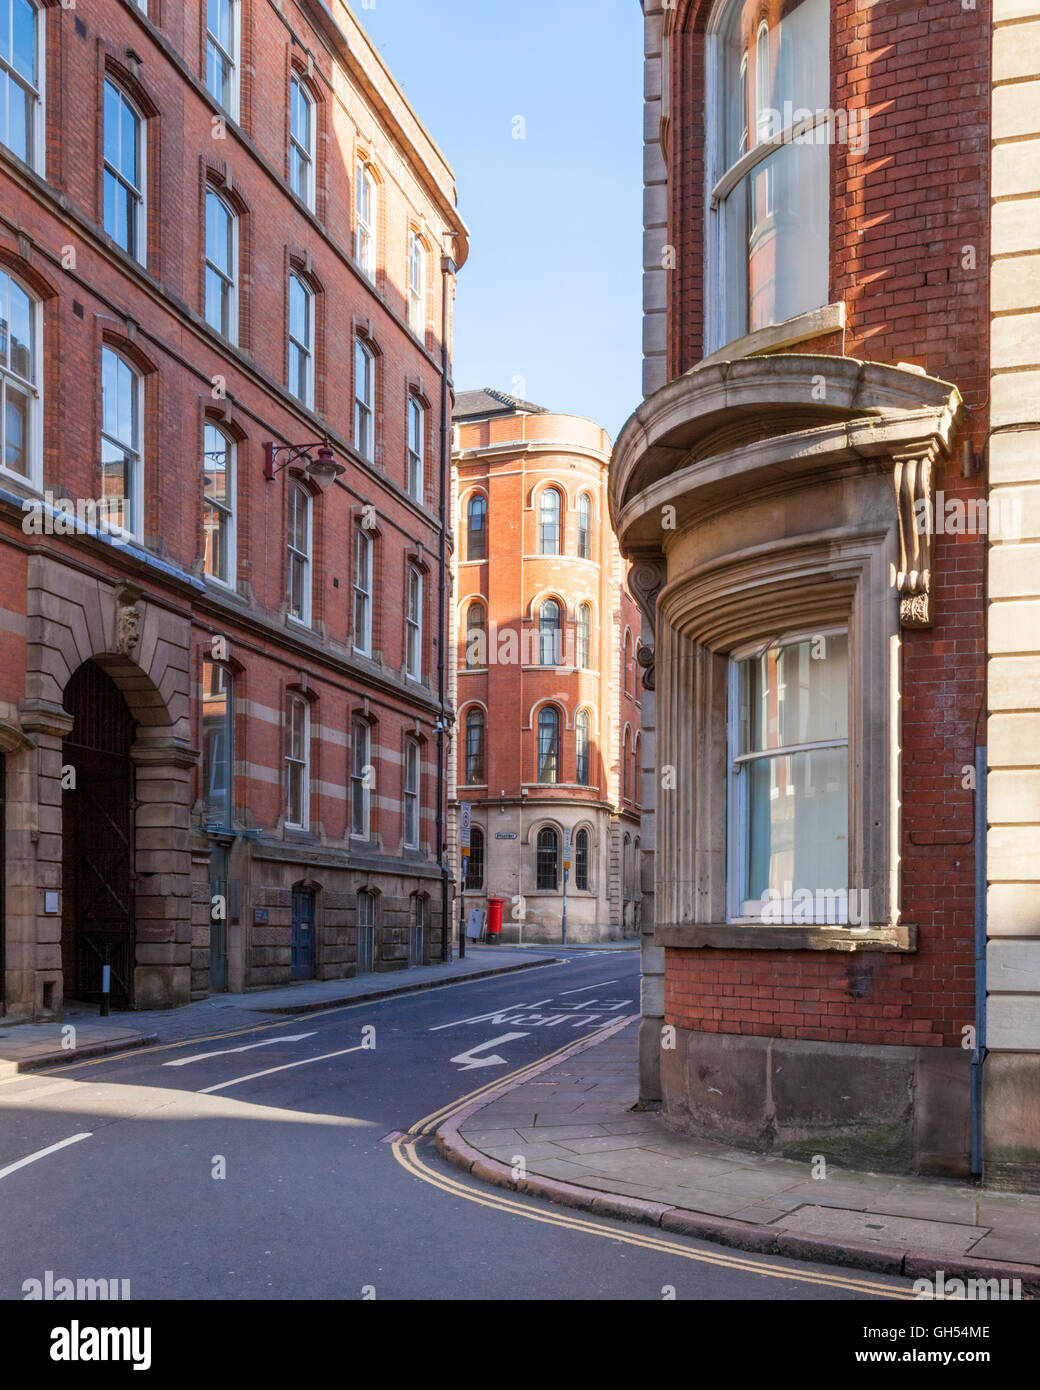 A narrow street and tall buildings. Former Victorian factories and warehouses, typical of the Lace Market area in Nottingham, England, UK Stock Photo